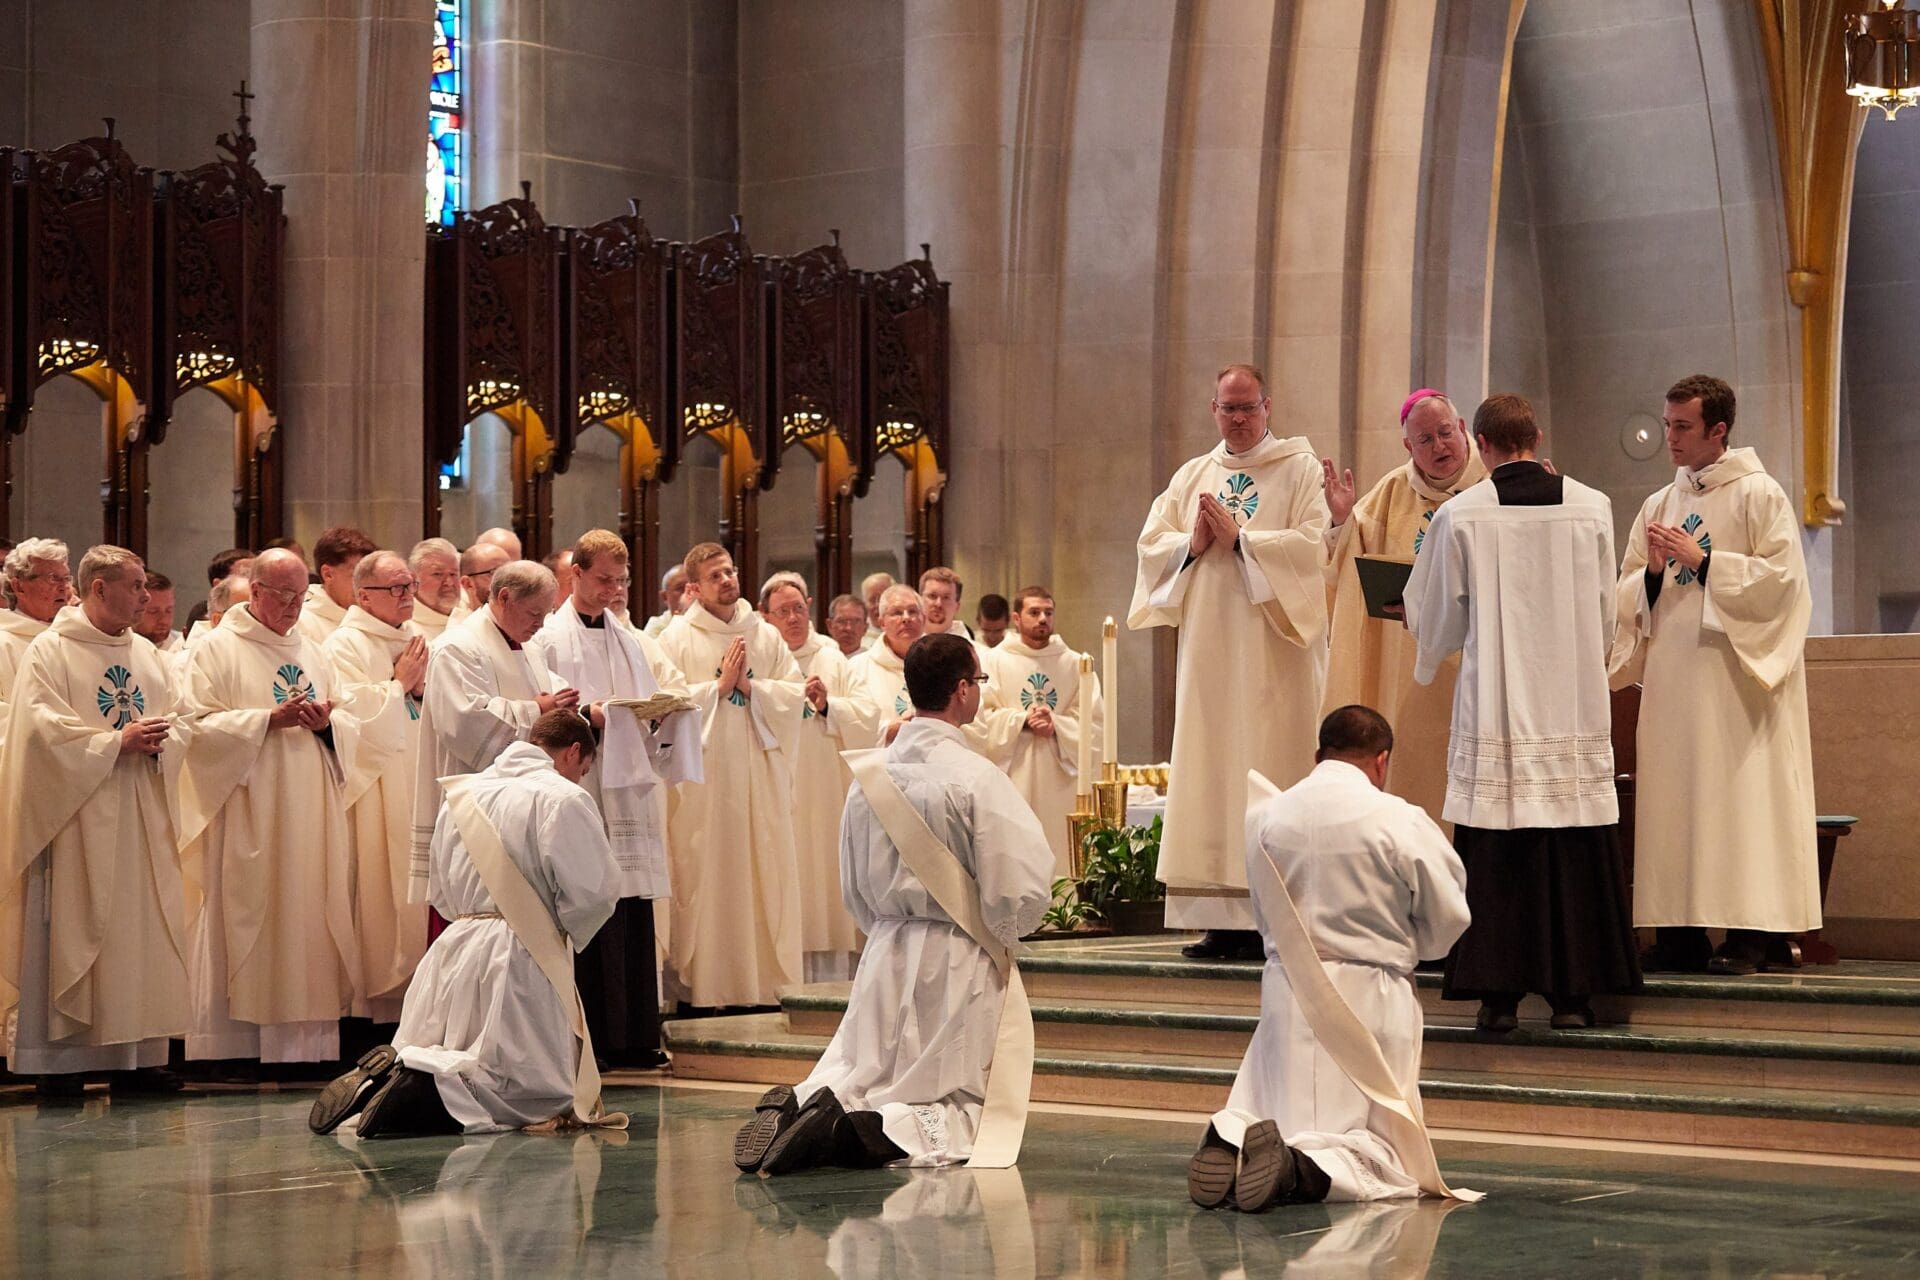 To Pray, Protect, and Promote: The Bishop’s Role in the Liturgical Life of the Church